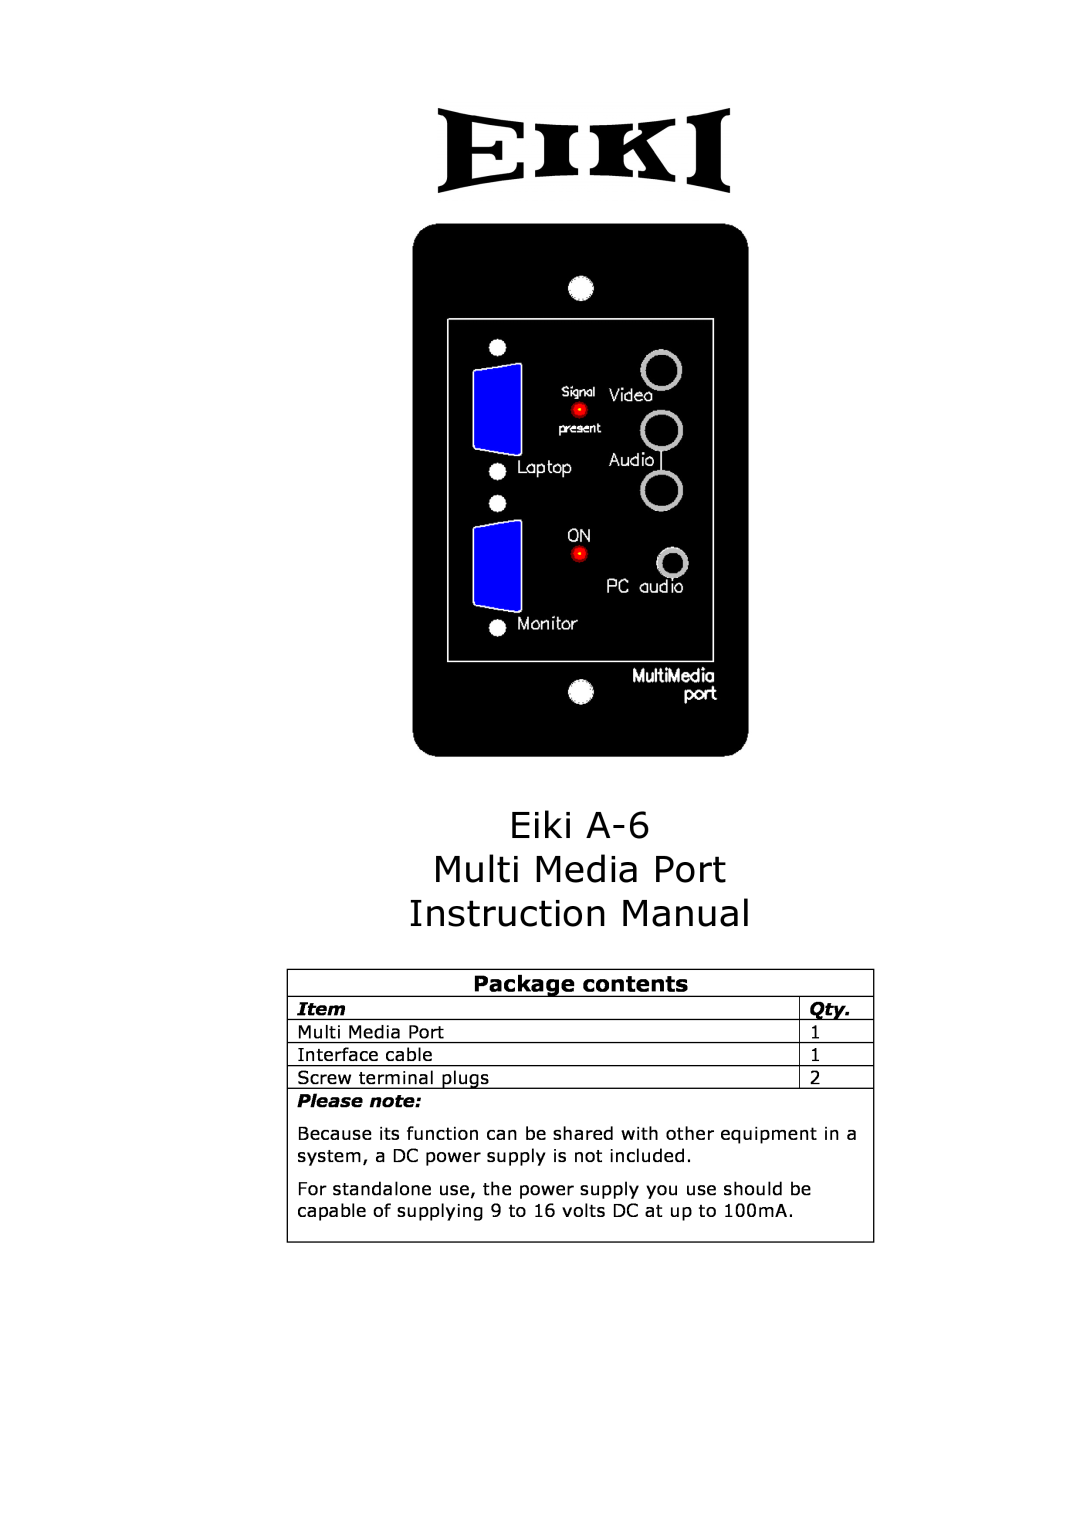 Eiki A-6 instruction manual Package contents 